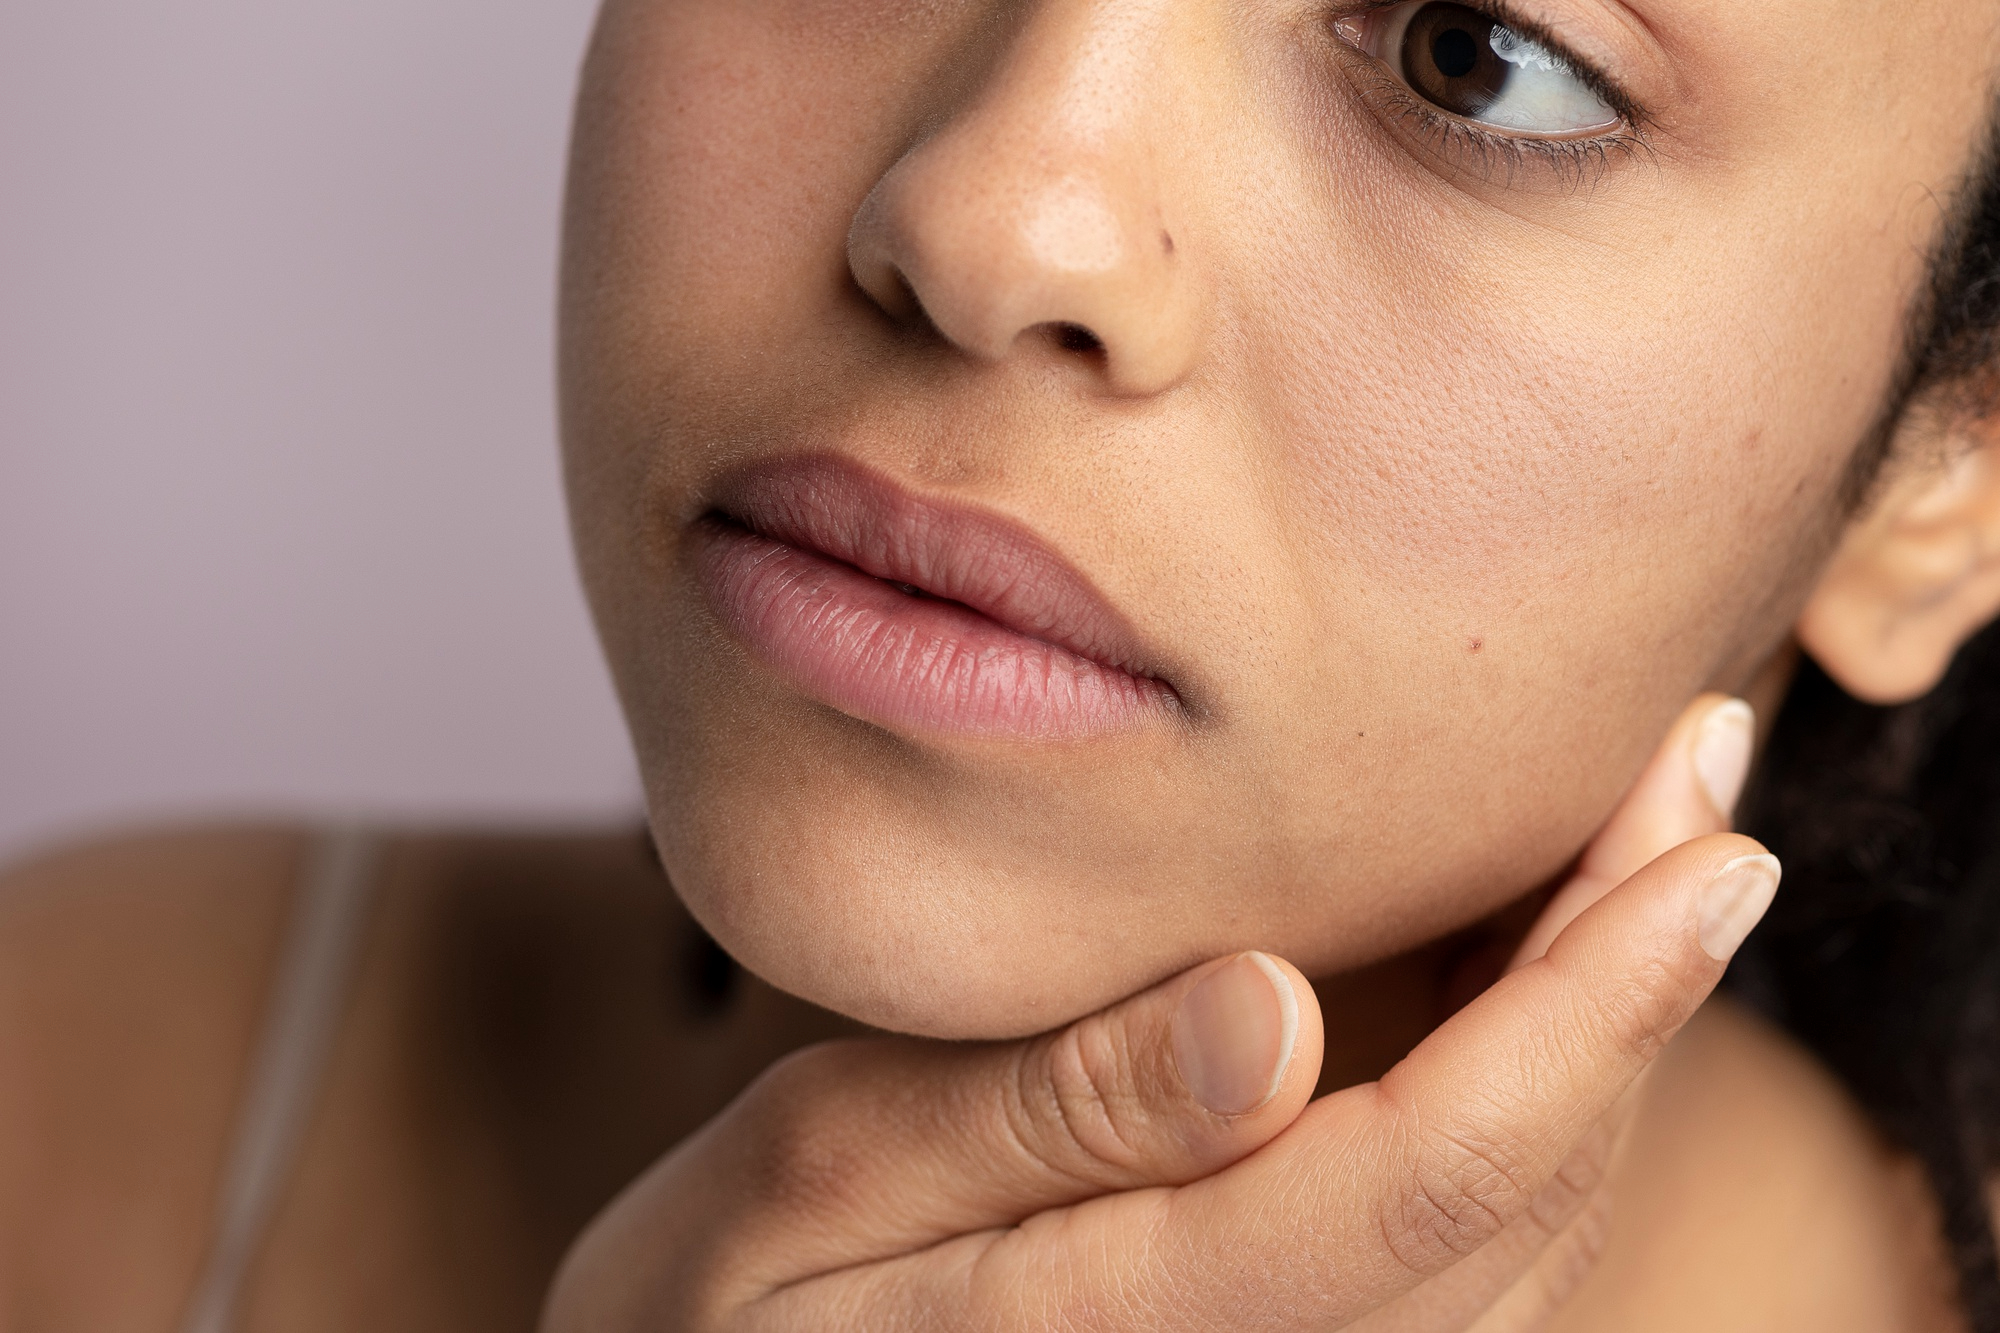 Is Your Skin Looking Tired? Find Out How to Revive Its Radiance